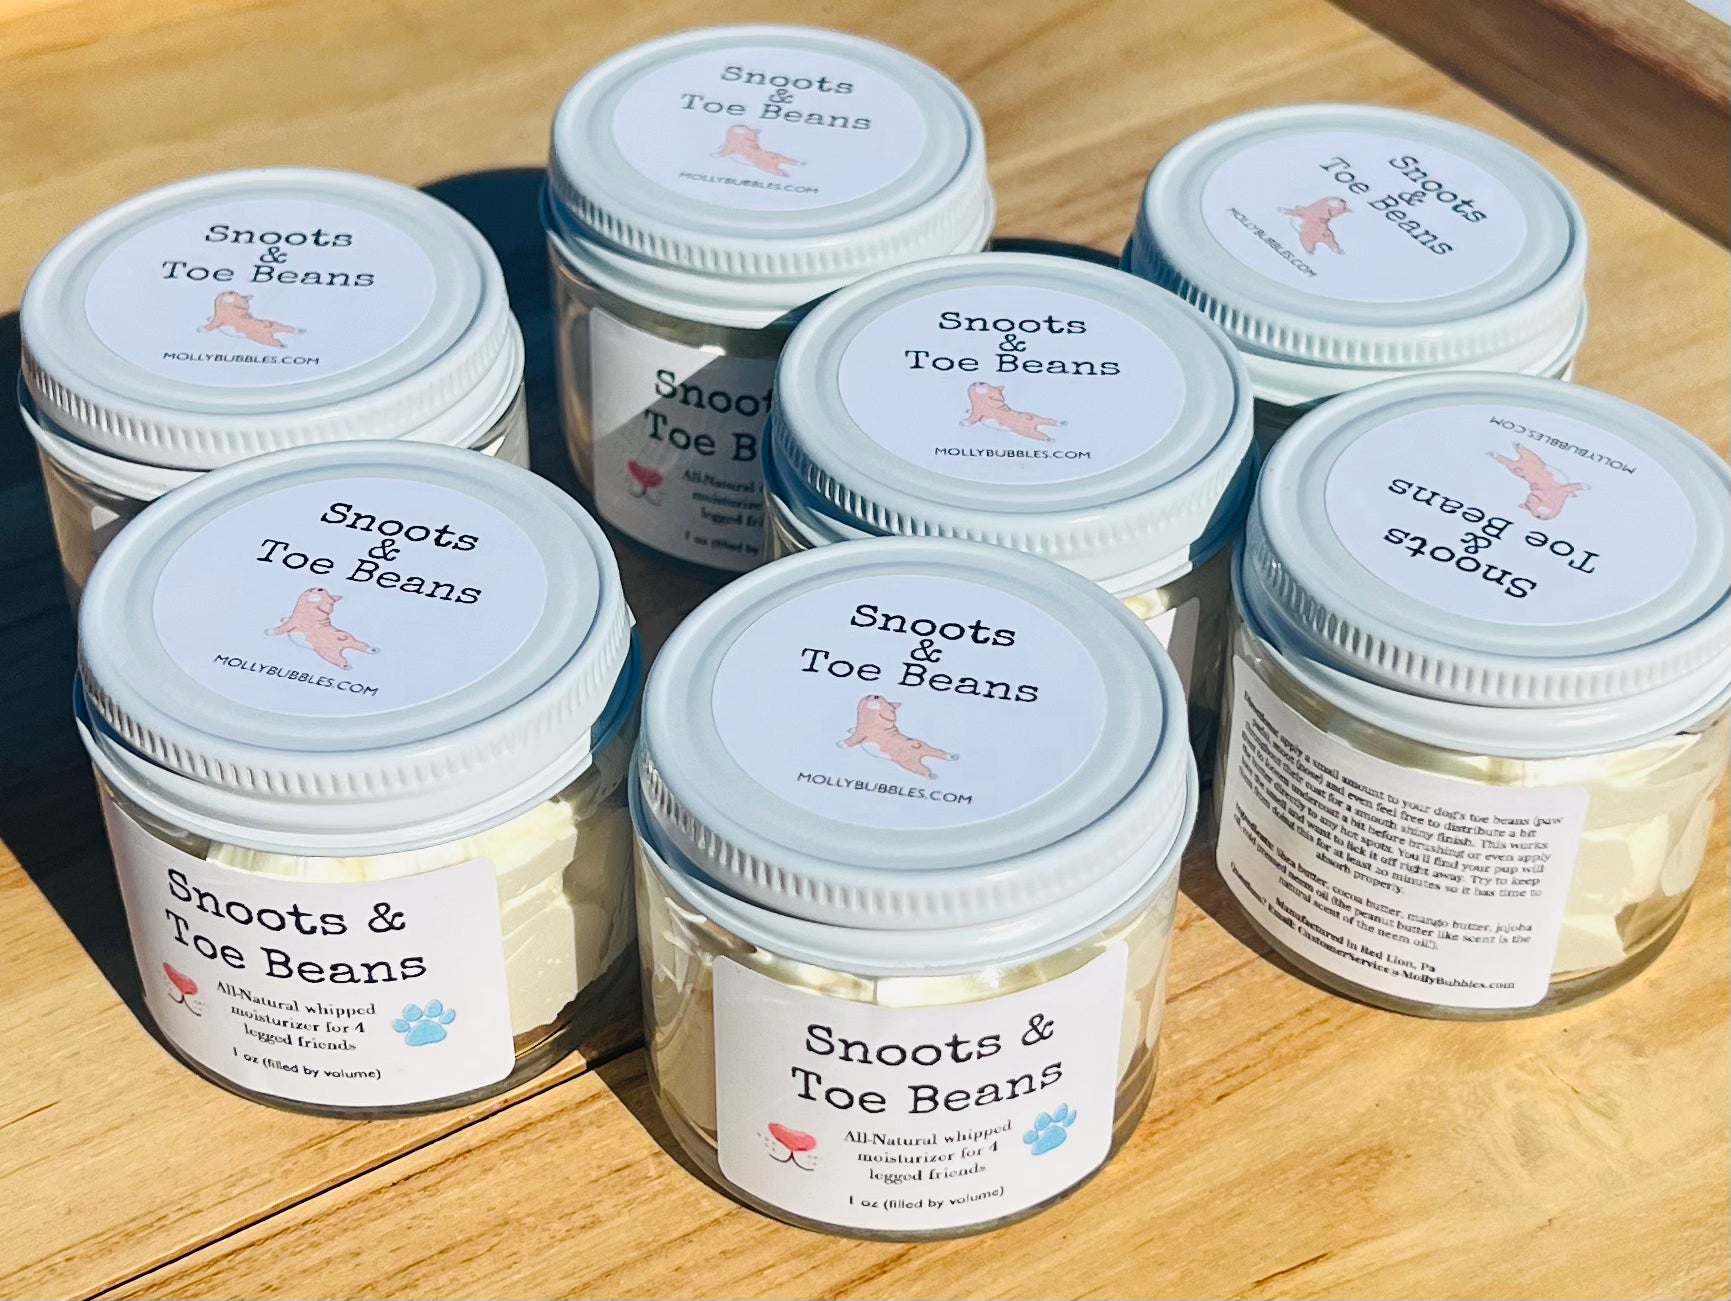 Snoots & Toe Beans (All-Natural whipped Neem oil moisturizer for dogs)